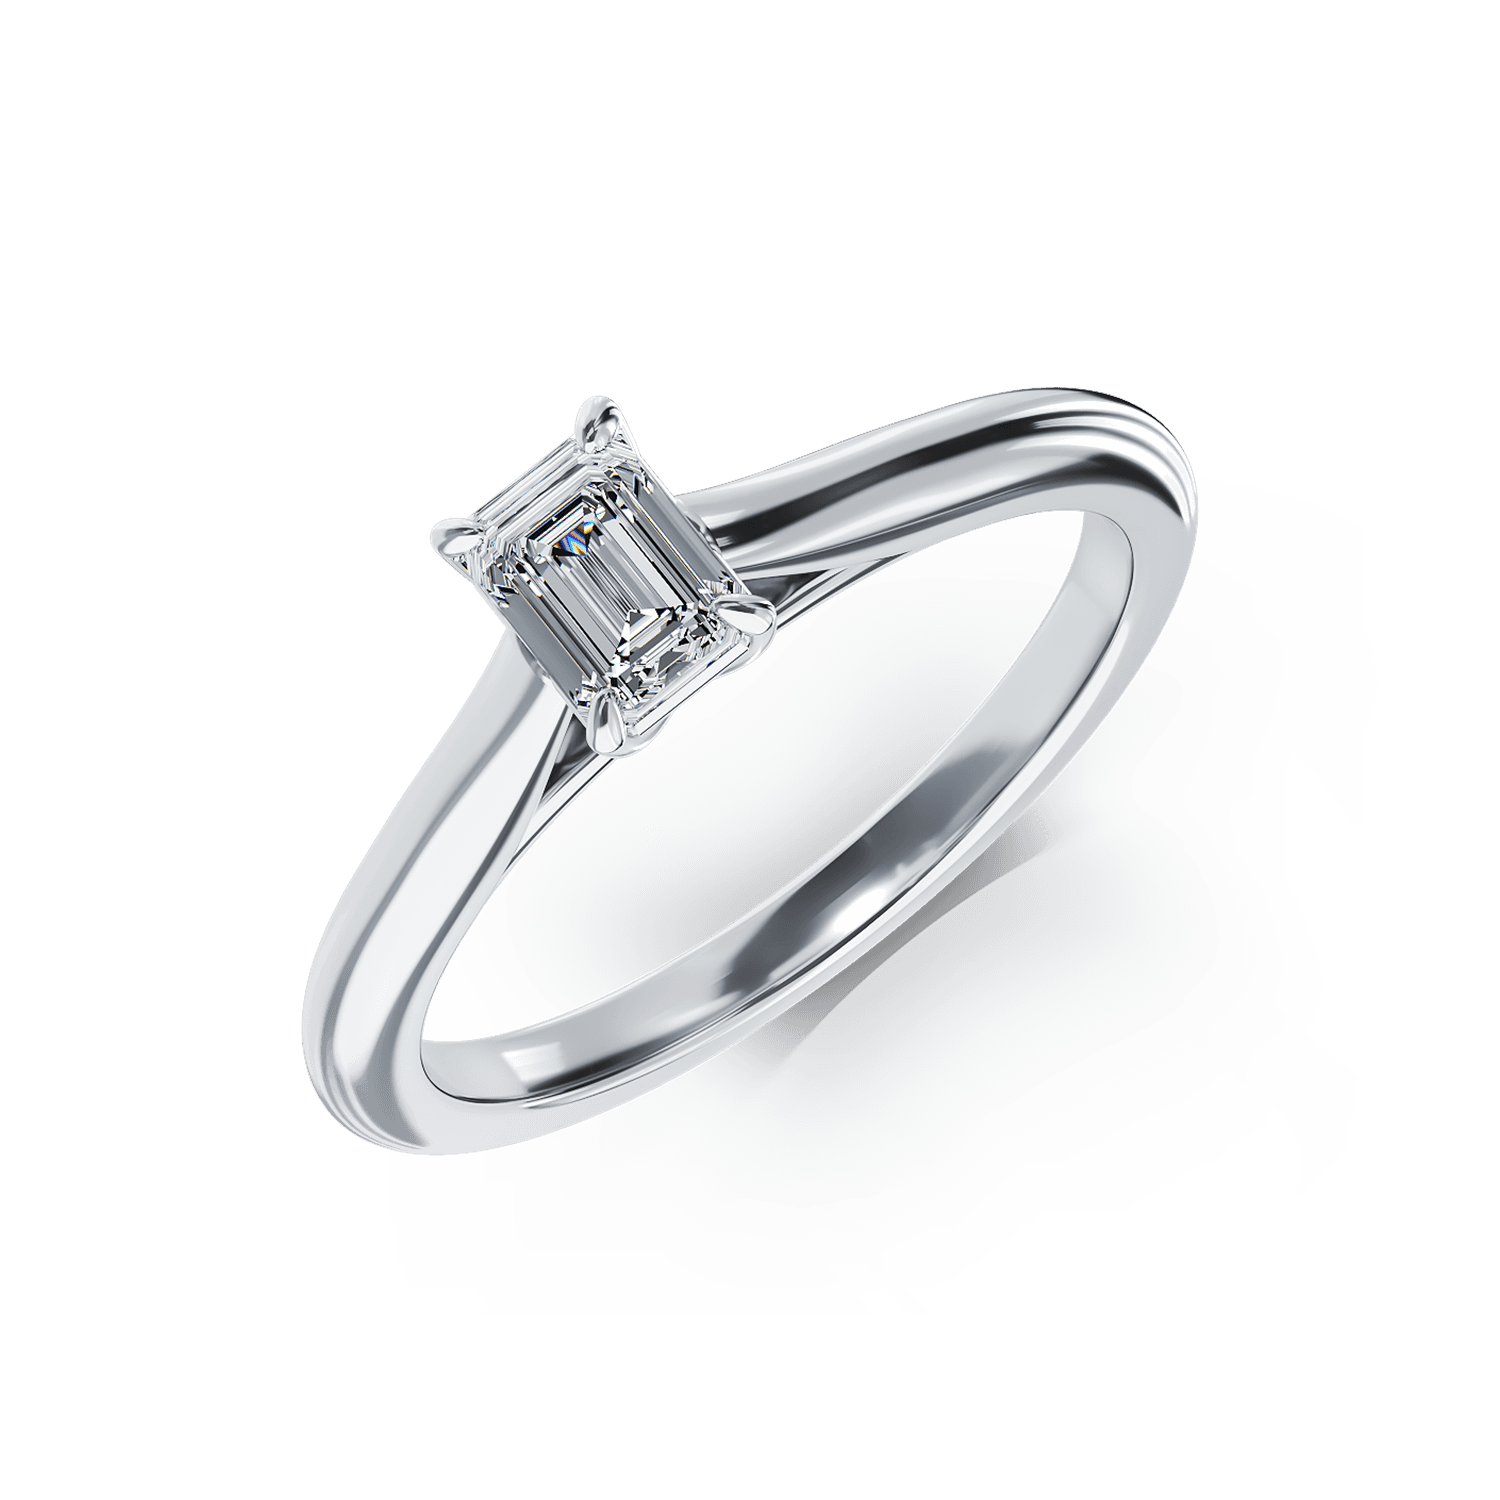 Platinum engagement ring with a 0.41ct solitaire diamond